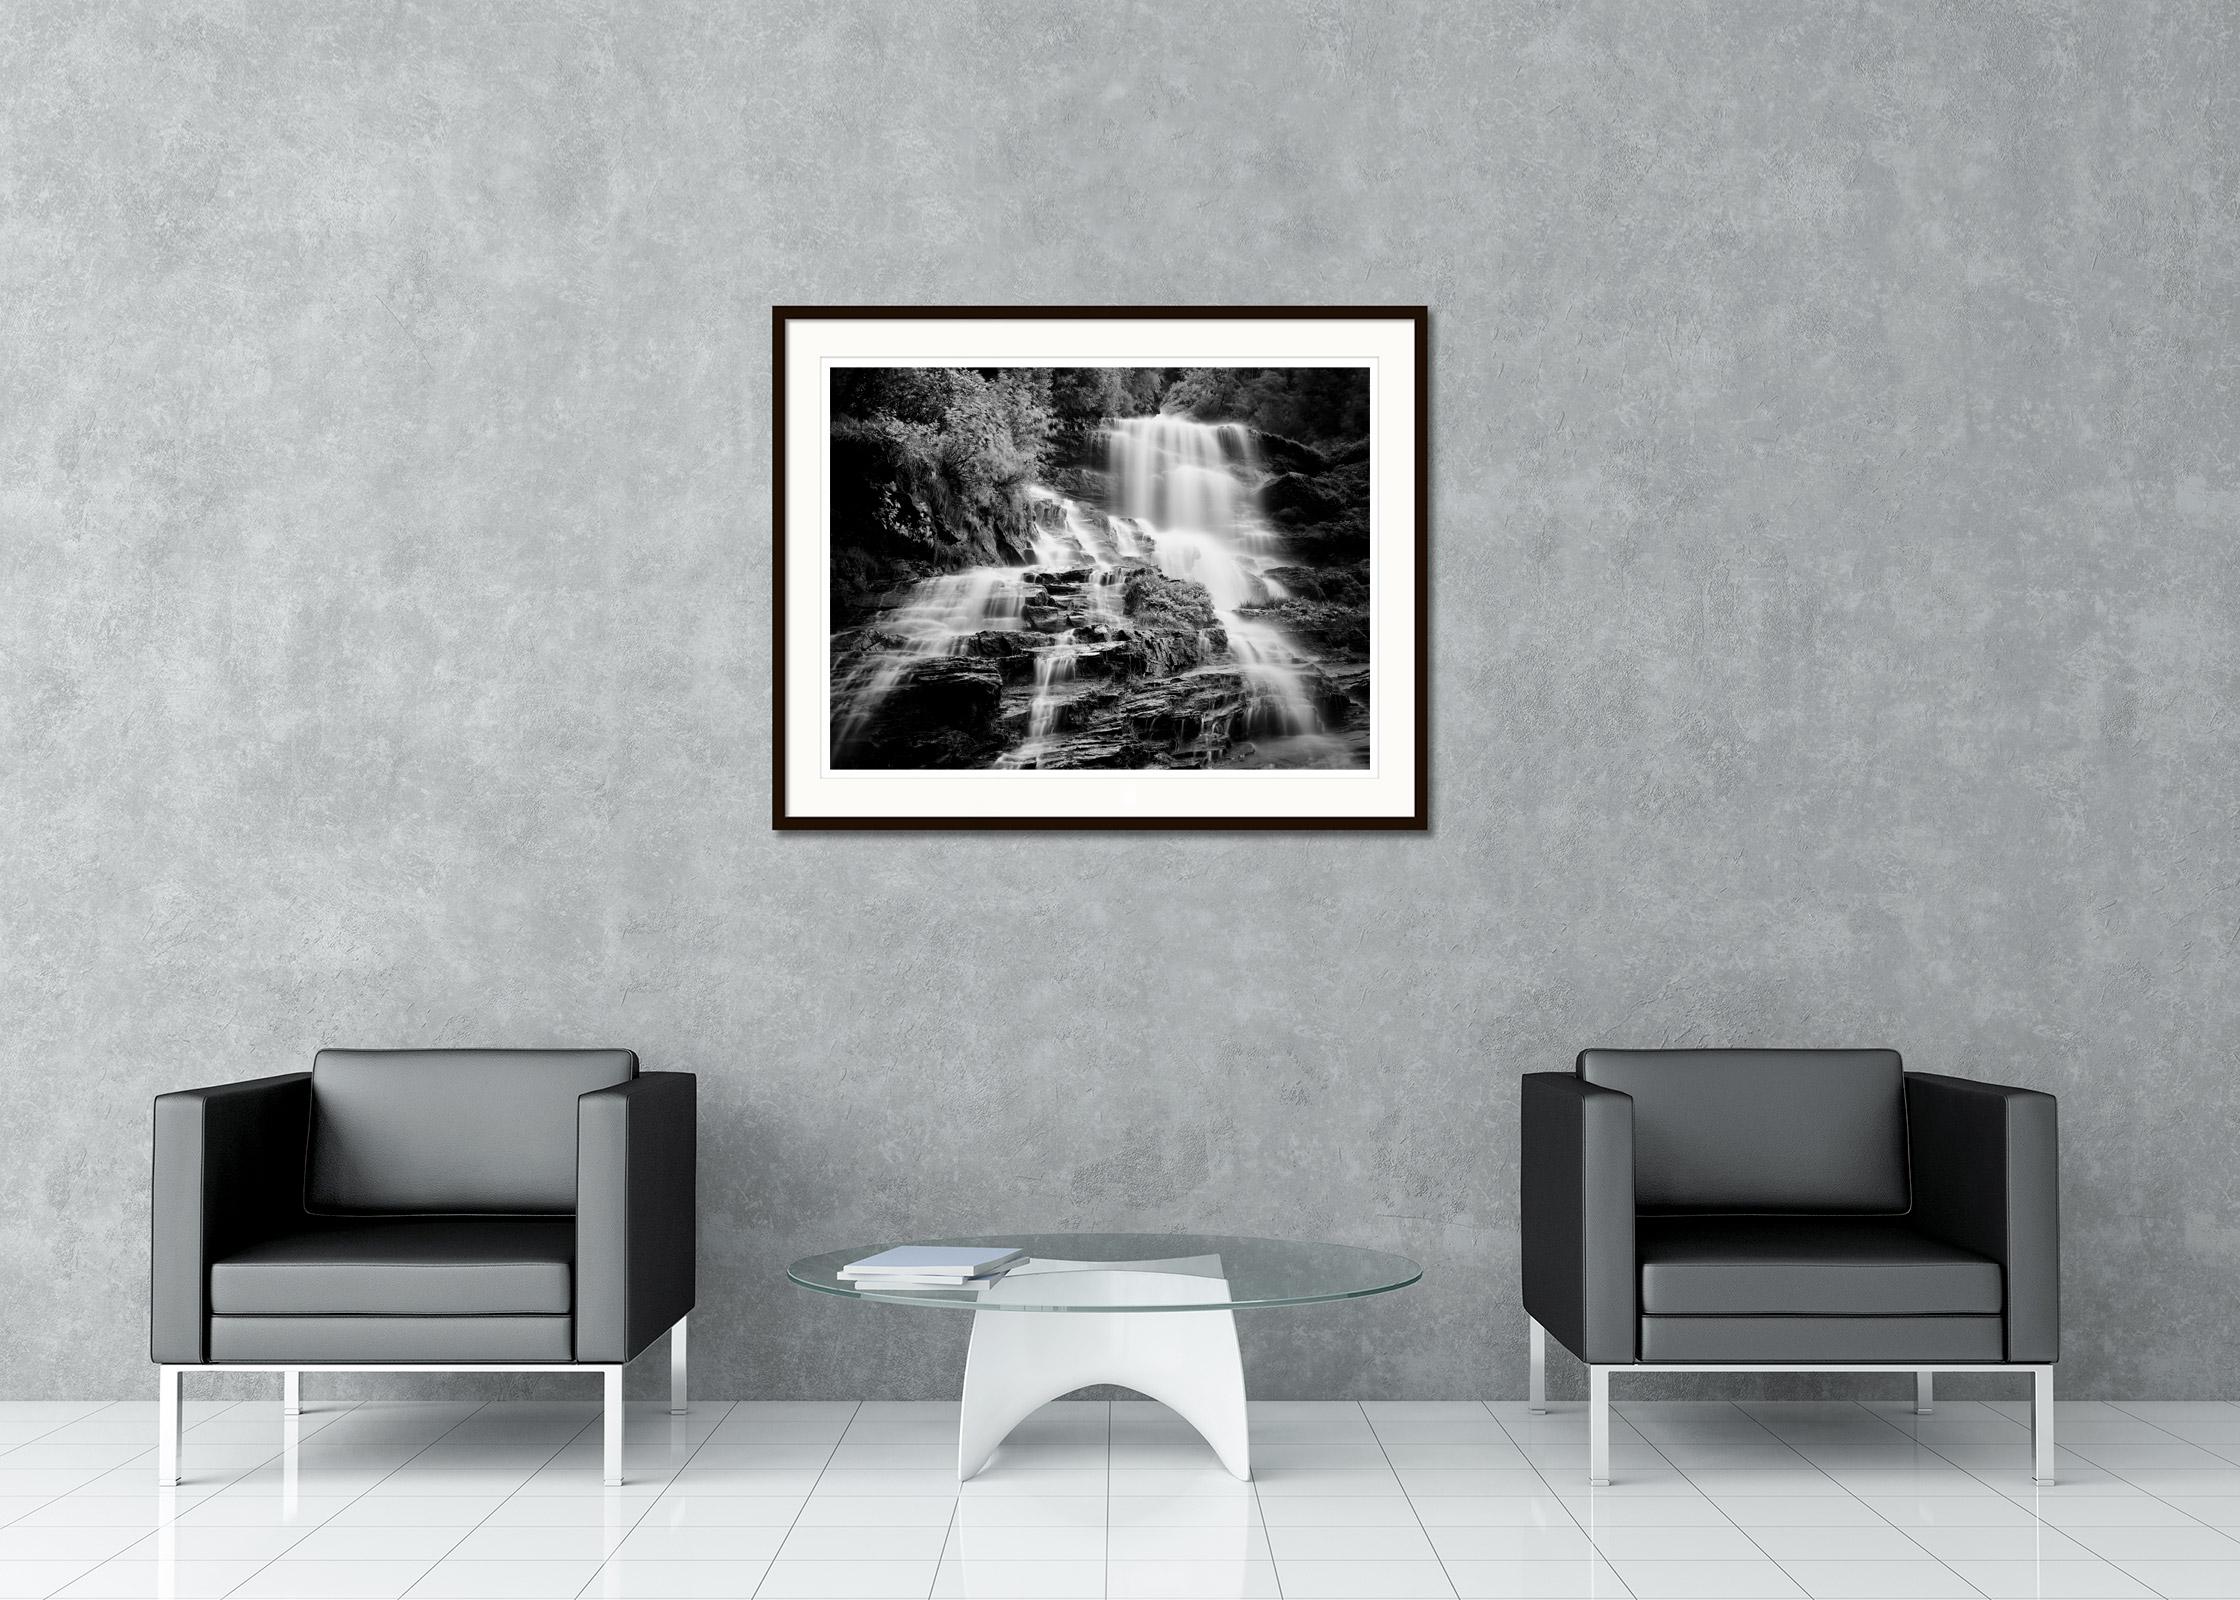 Black and white fine art long exposure waterscape - landscape photography. Waterfall detail from the beautiful Klockelefall, Pitztal, Austria. Archival pigment ink print as part of a limited edition of 5. All Gerald Berghammer prints are made to